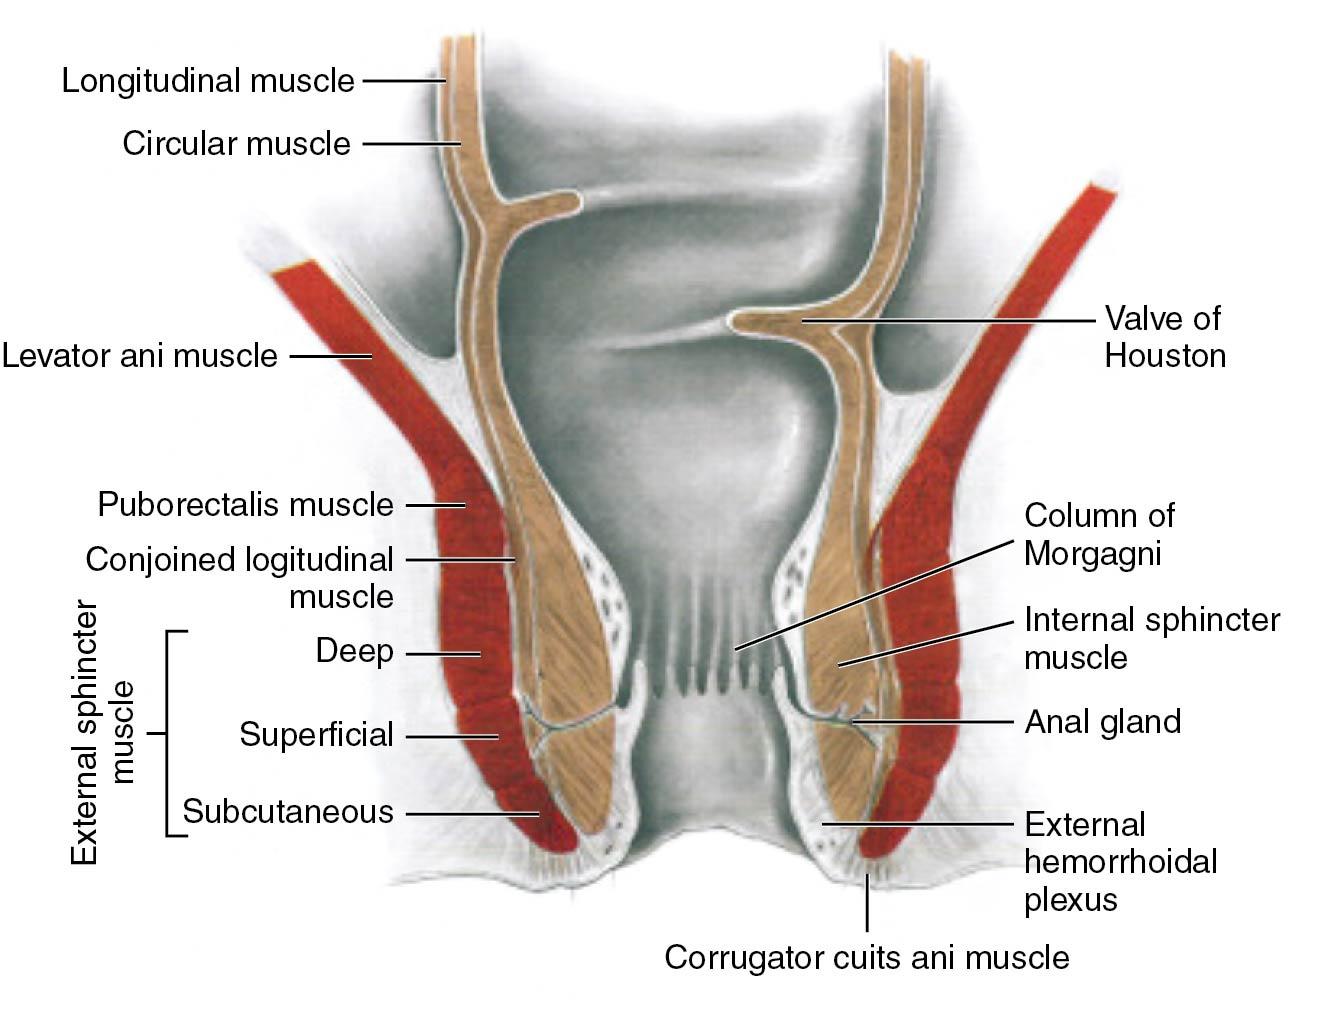 Fig. 22.1, Coronal section of the anal canal and lower rectum.